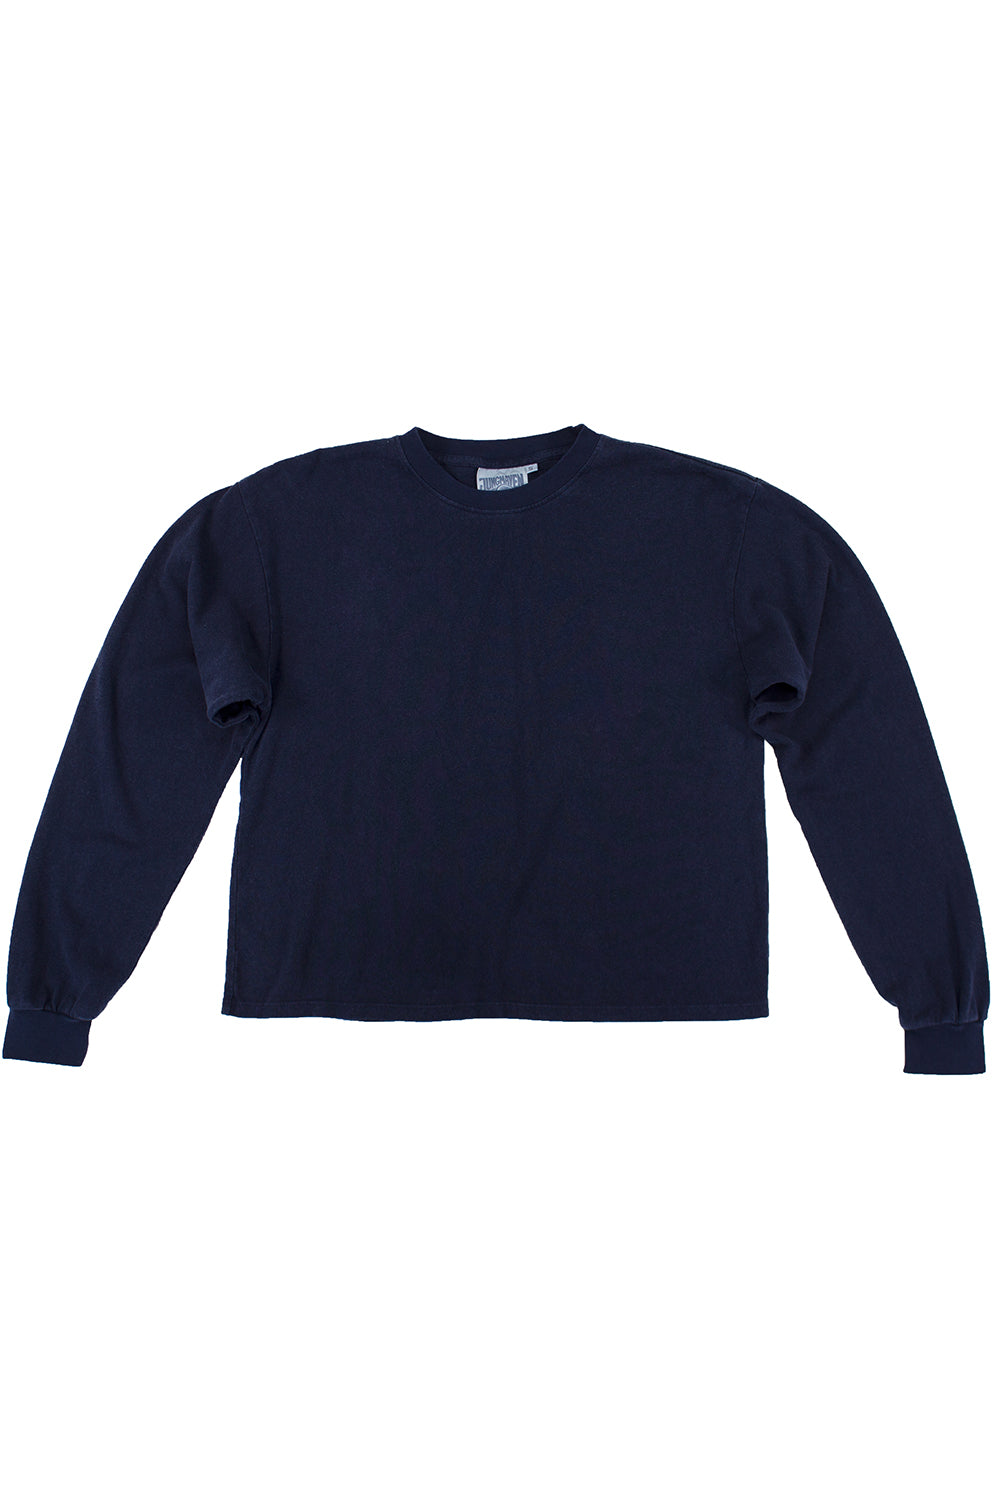 Cropped Long Sleeve Tee | Jungmaven Hemp Clothing & Accessories / Color: Navy